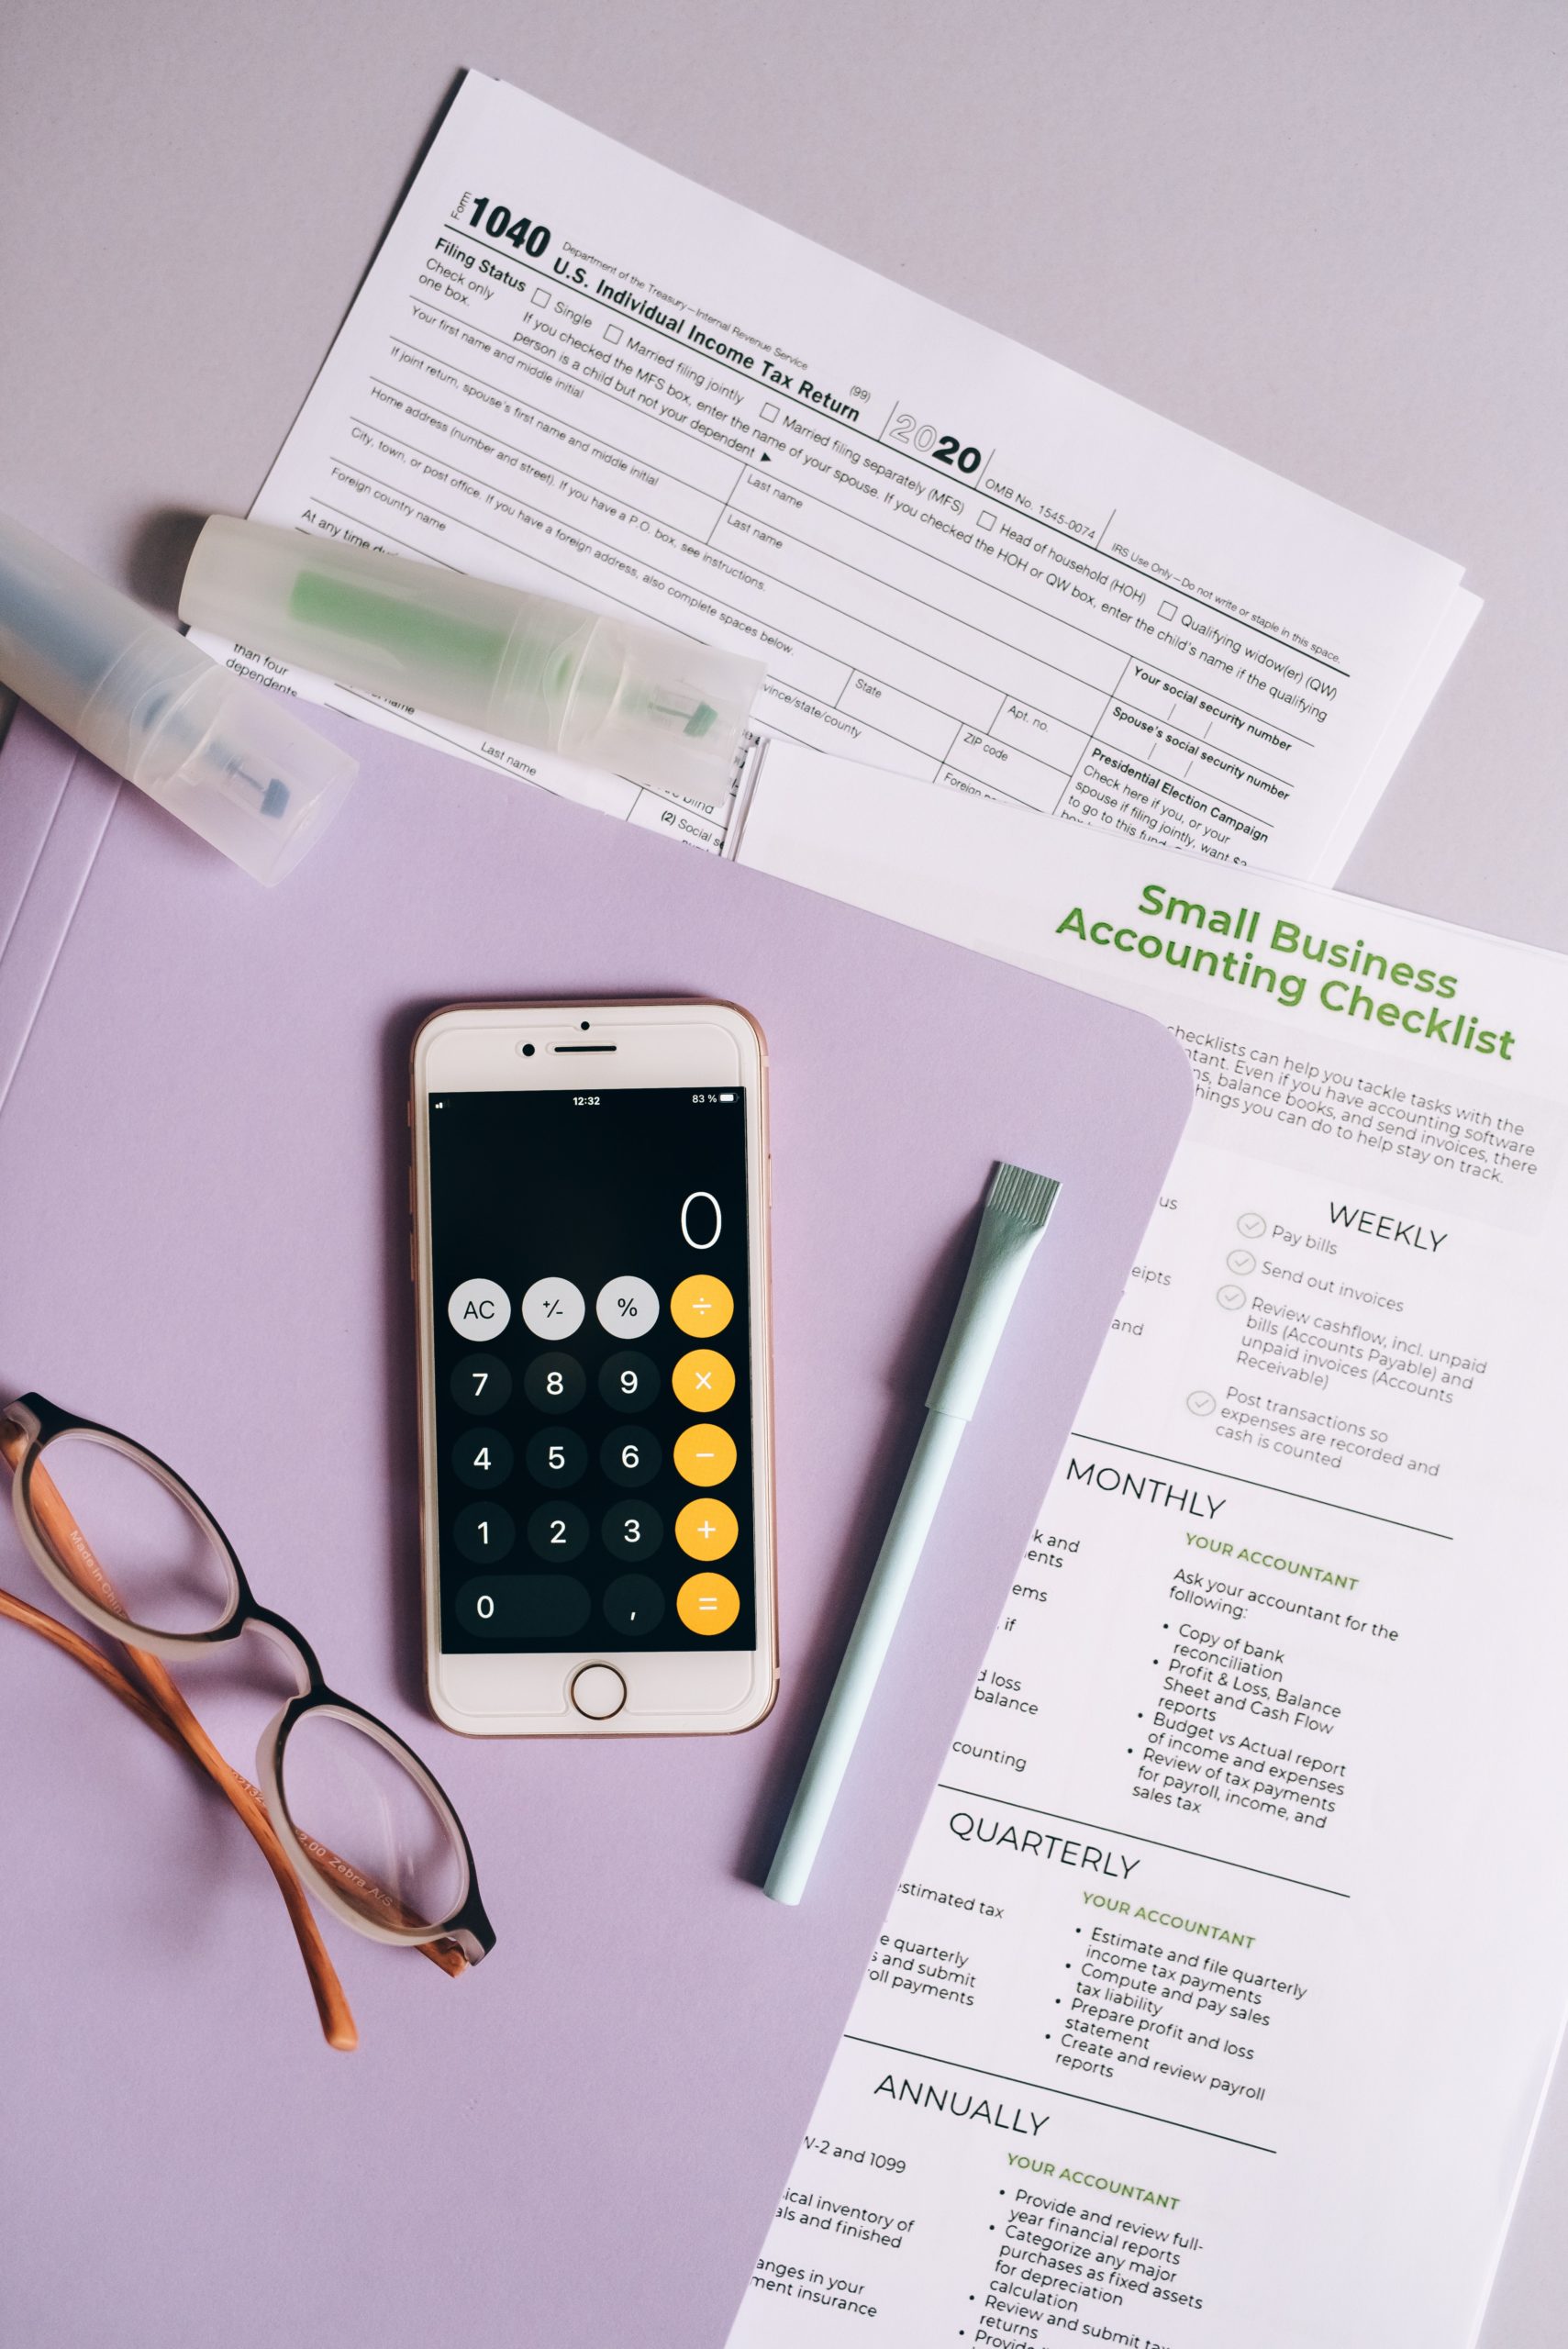 Cell phone besides tax pape and small business Accounting checklist